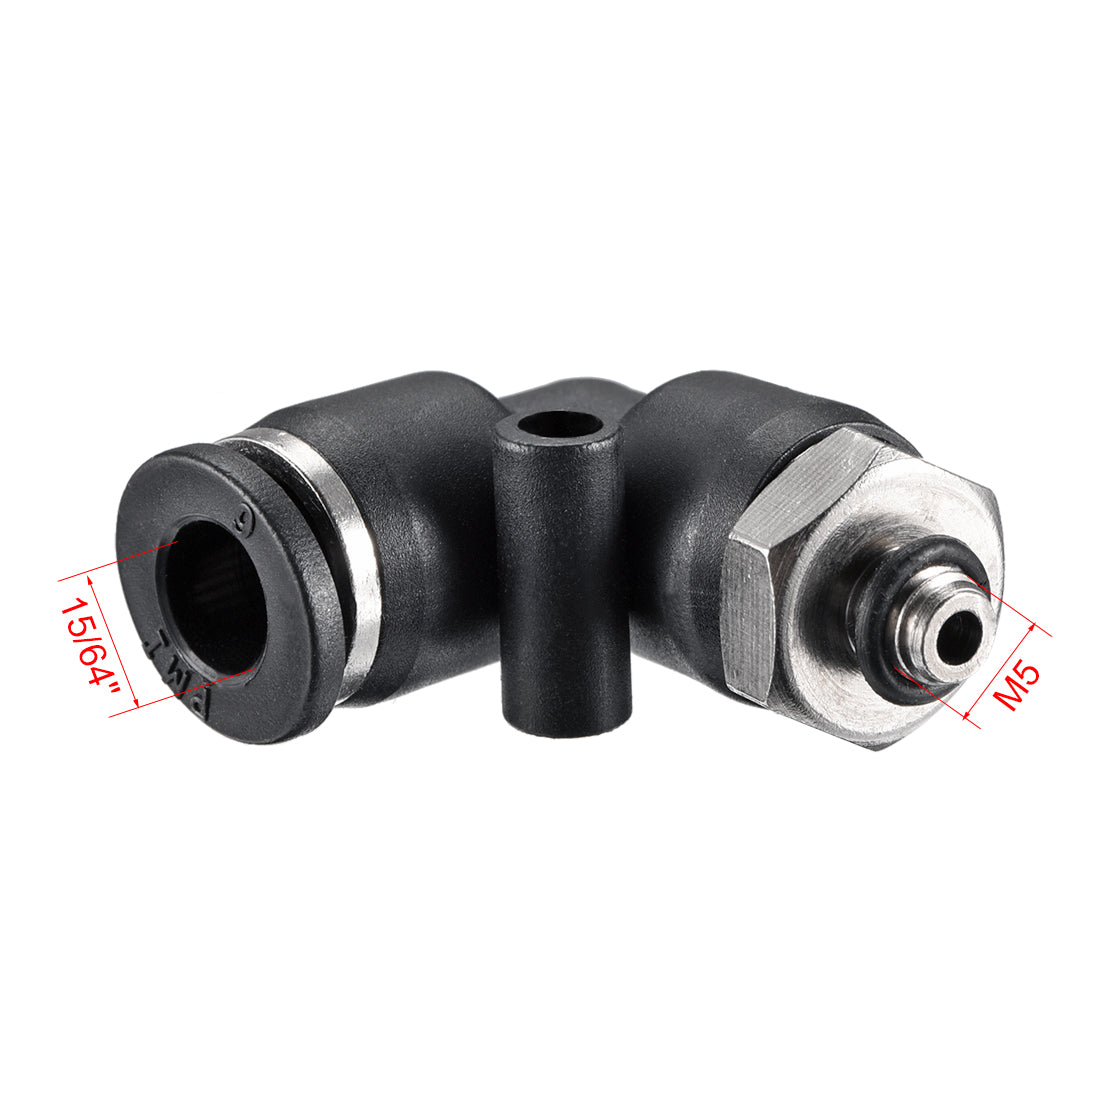 uxcell Uxcell PL6-M5 Pneumatic Push to Connect Fitting, Male Elbow - 15/64" Tube OD x M5 Thread  Tube Fitting 2pcs